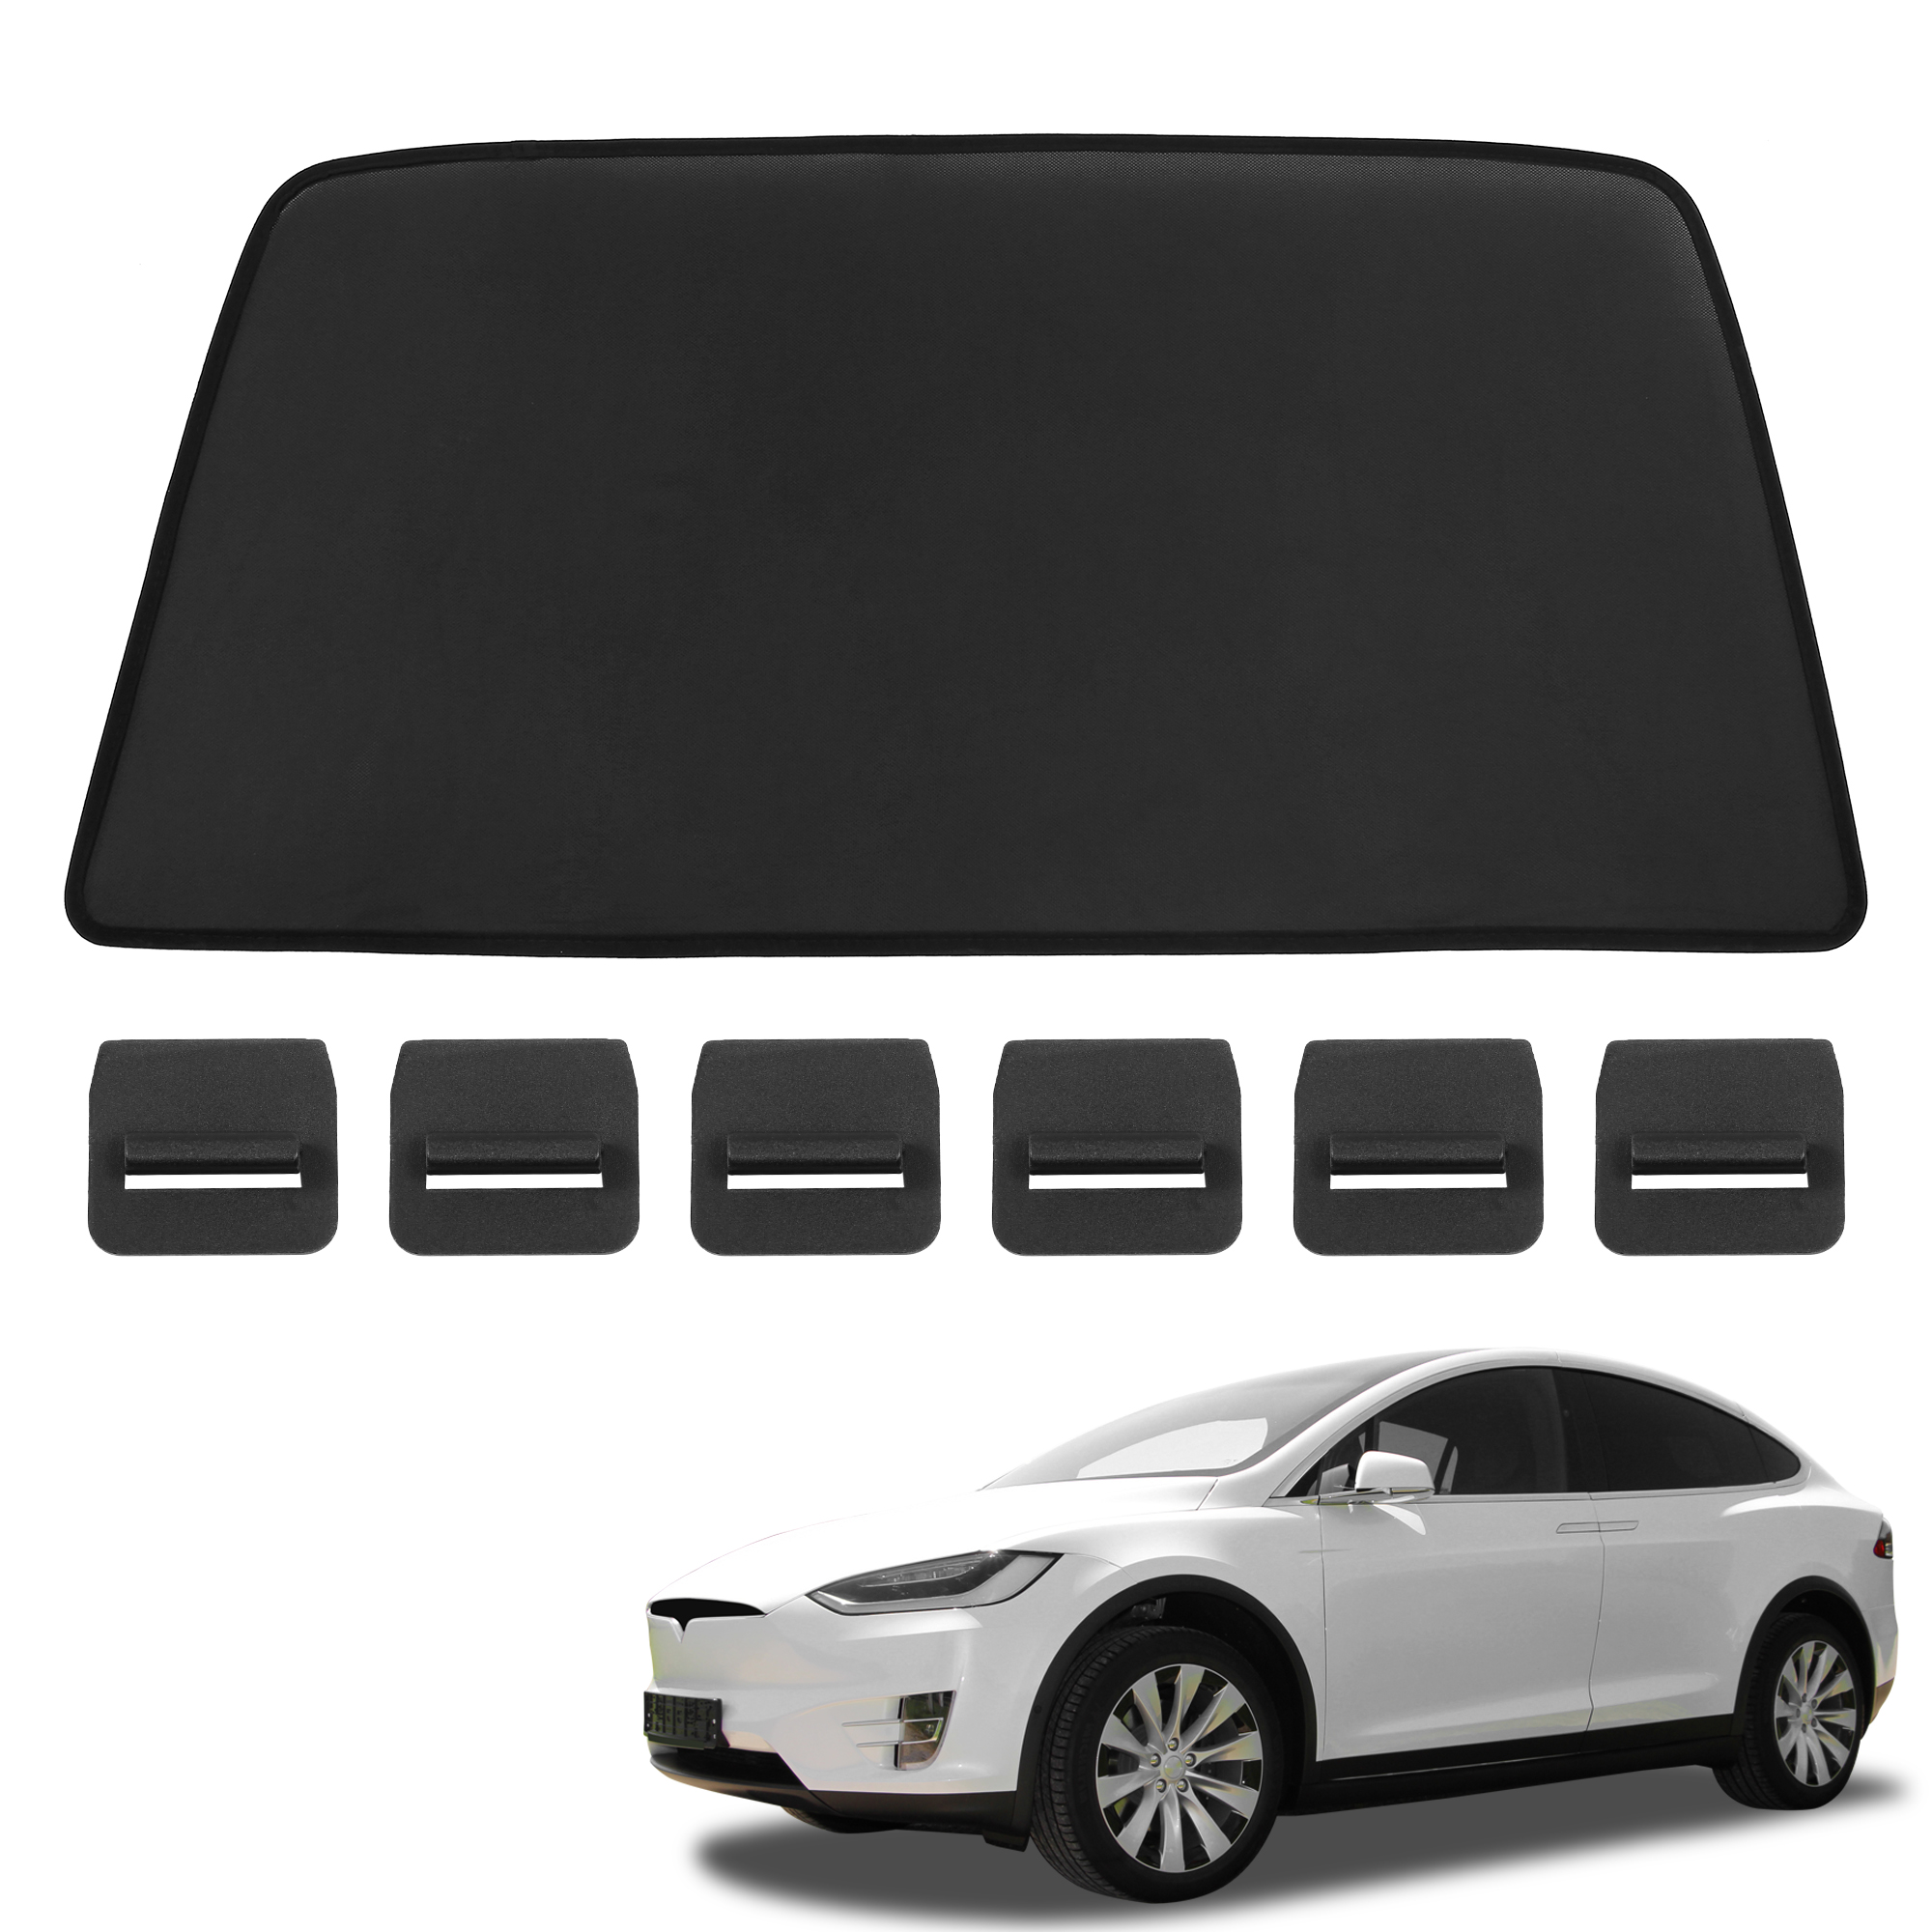 Unique Bargains Glass Roof Sunroof Shade Cover Front Window Sun Shade for Tesla Model X Top Roof